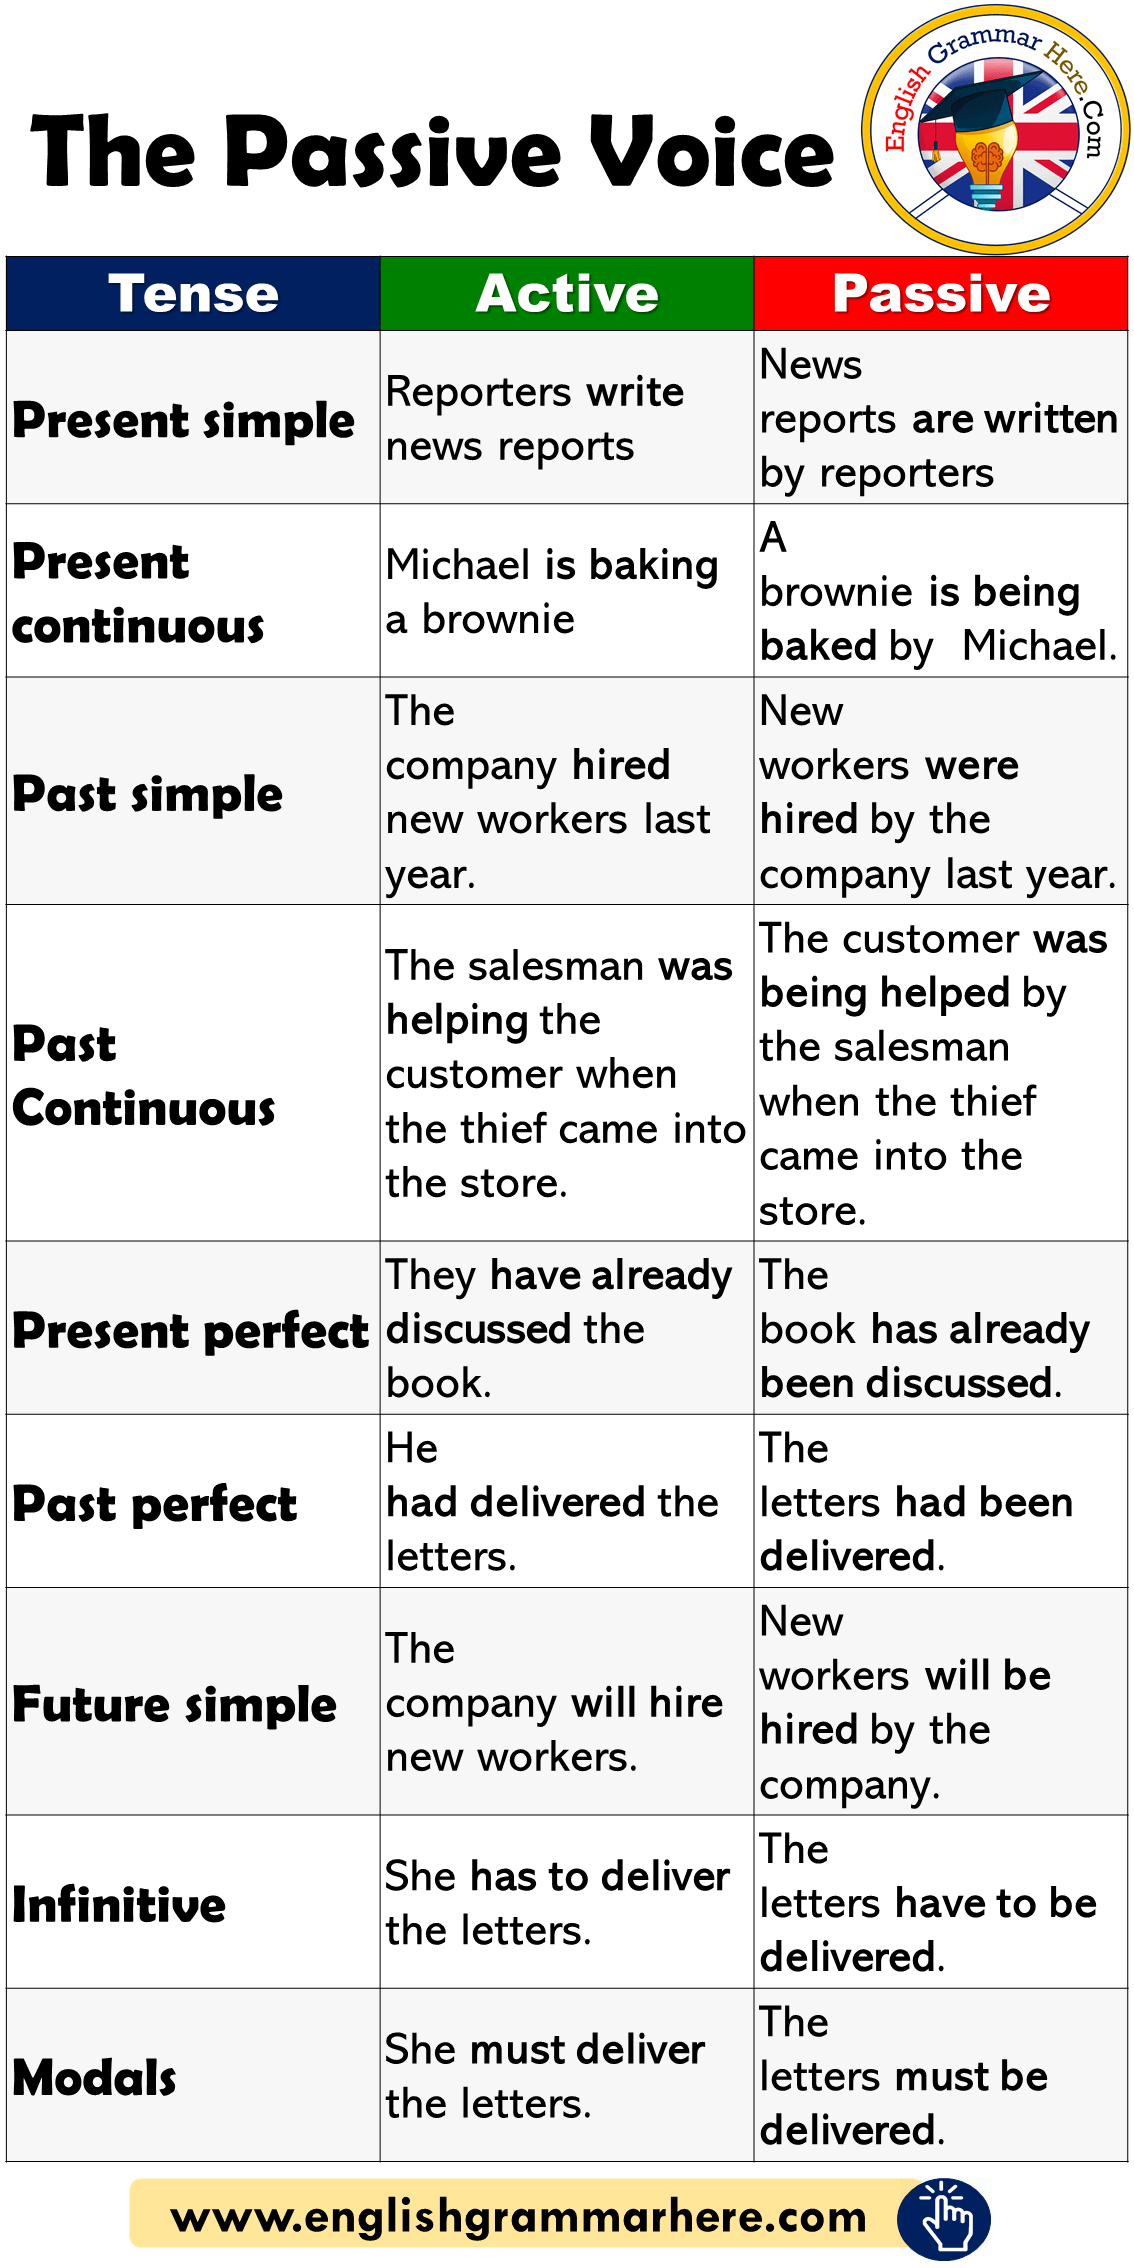 The Passive Voice and Example Sentences